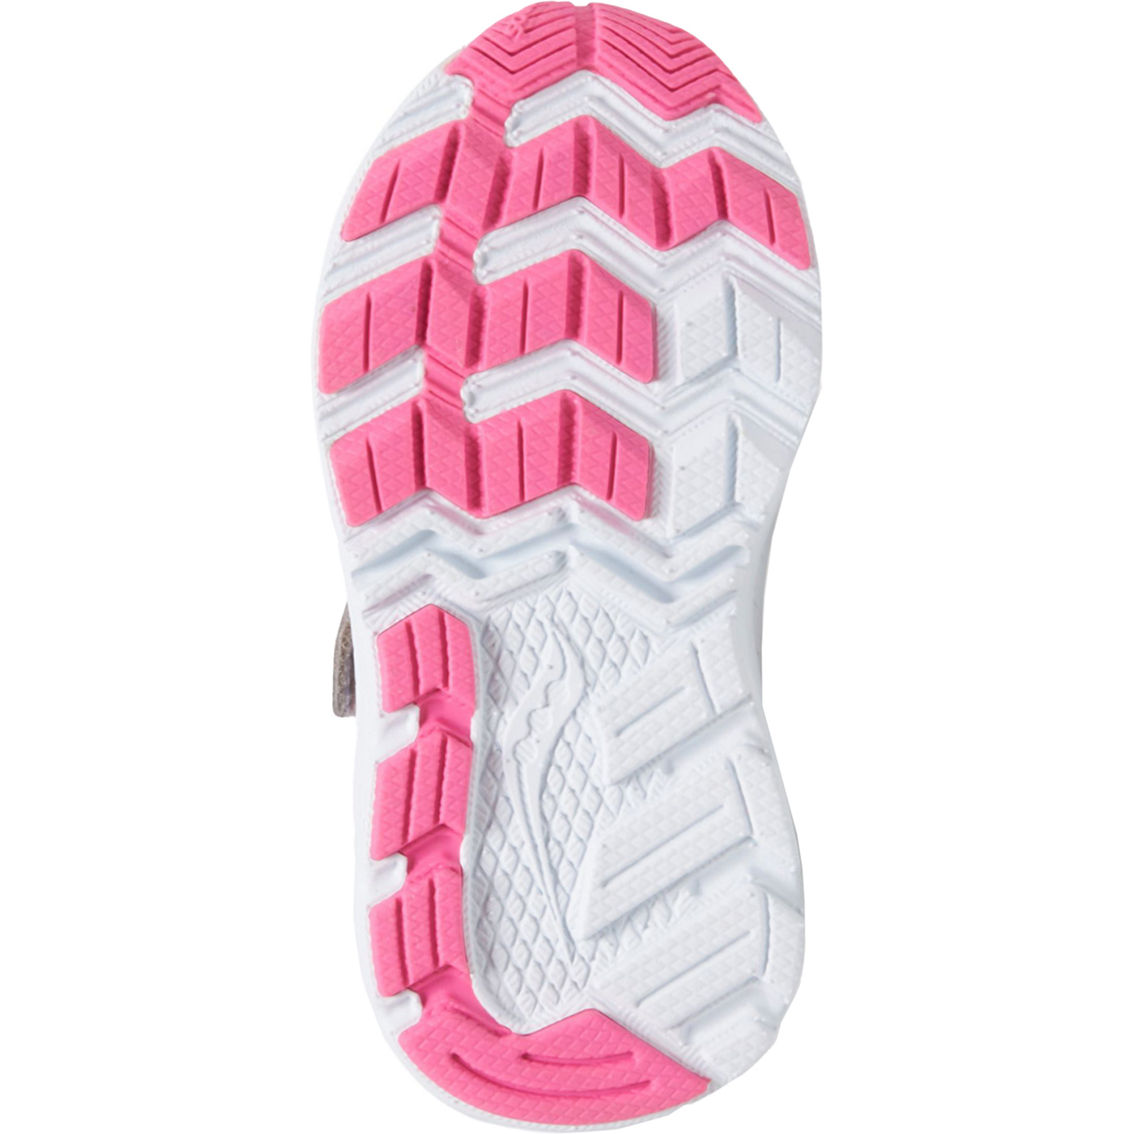 Saucony Toddler Girls Ride 10 Jr. Sneakers - Image 5 of 5